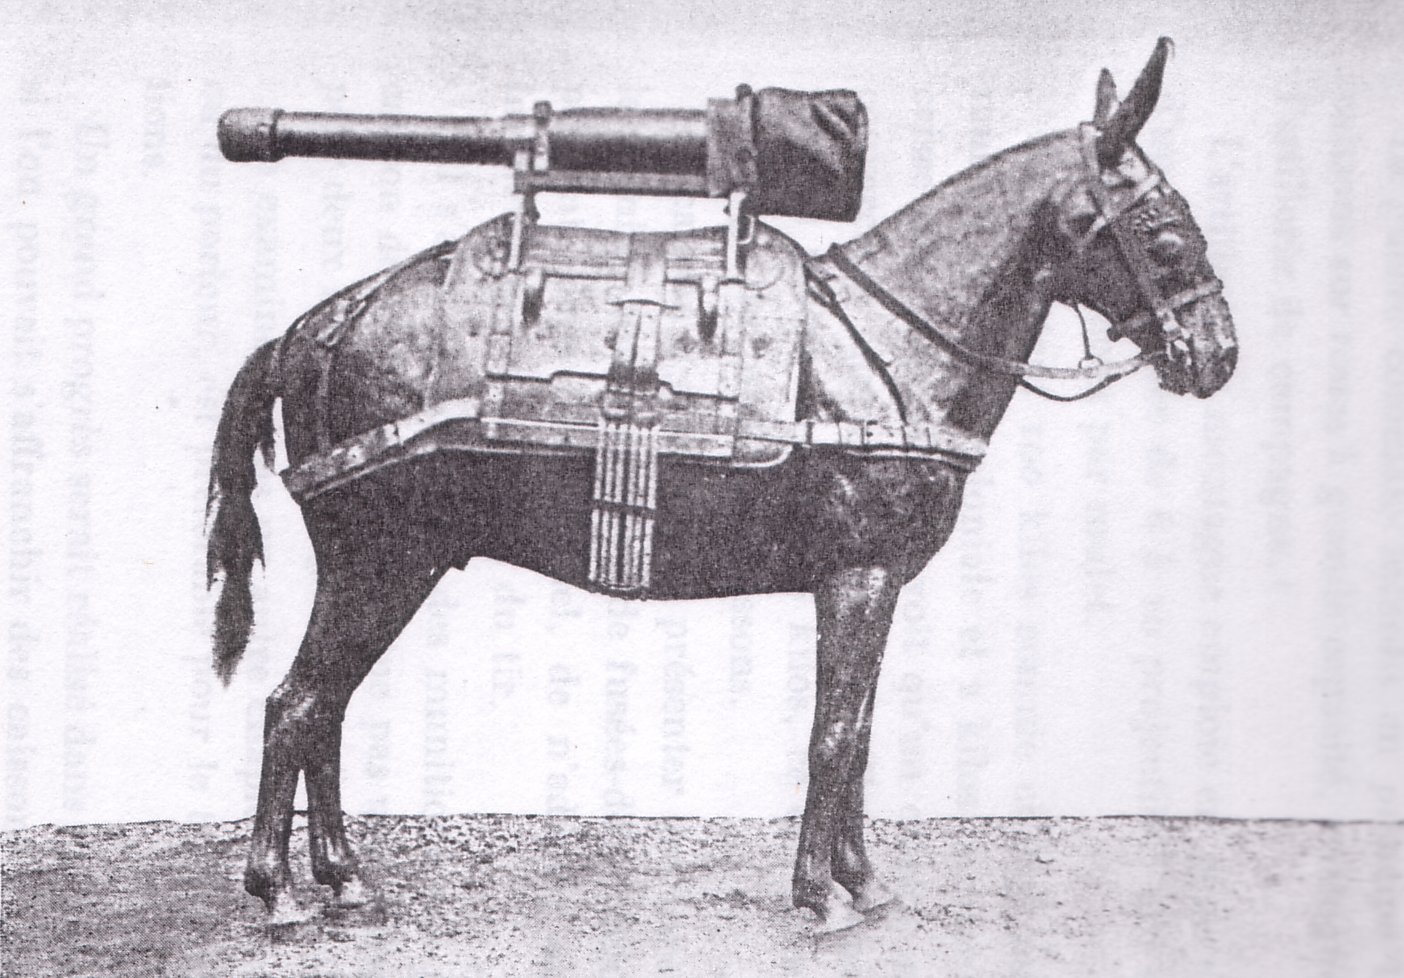 70mm Howitzer Barrel mounted on a pack mule